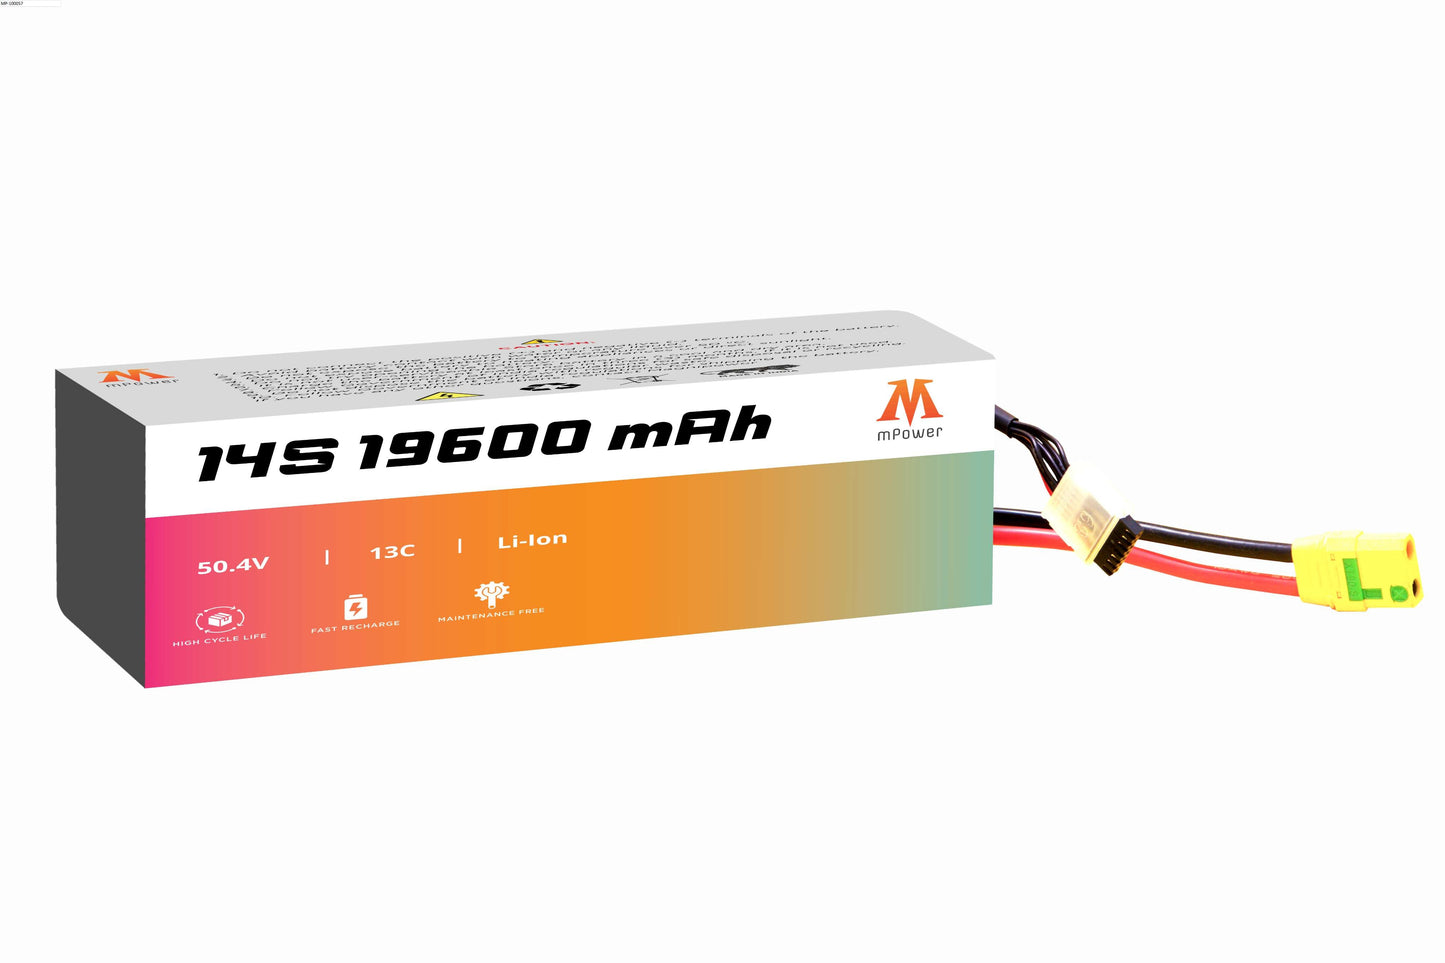 mPower 14S 19600mAh Lithium-Ion Battery for Survey Drones